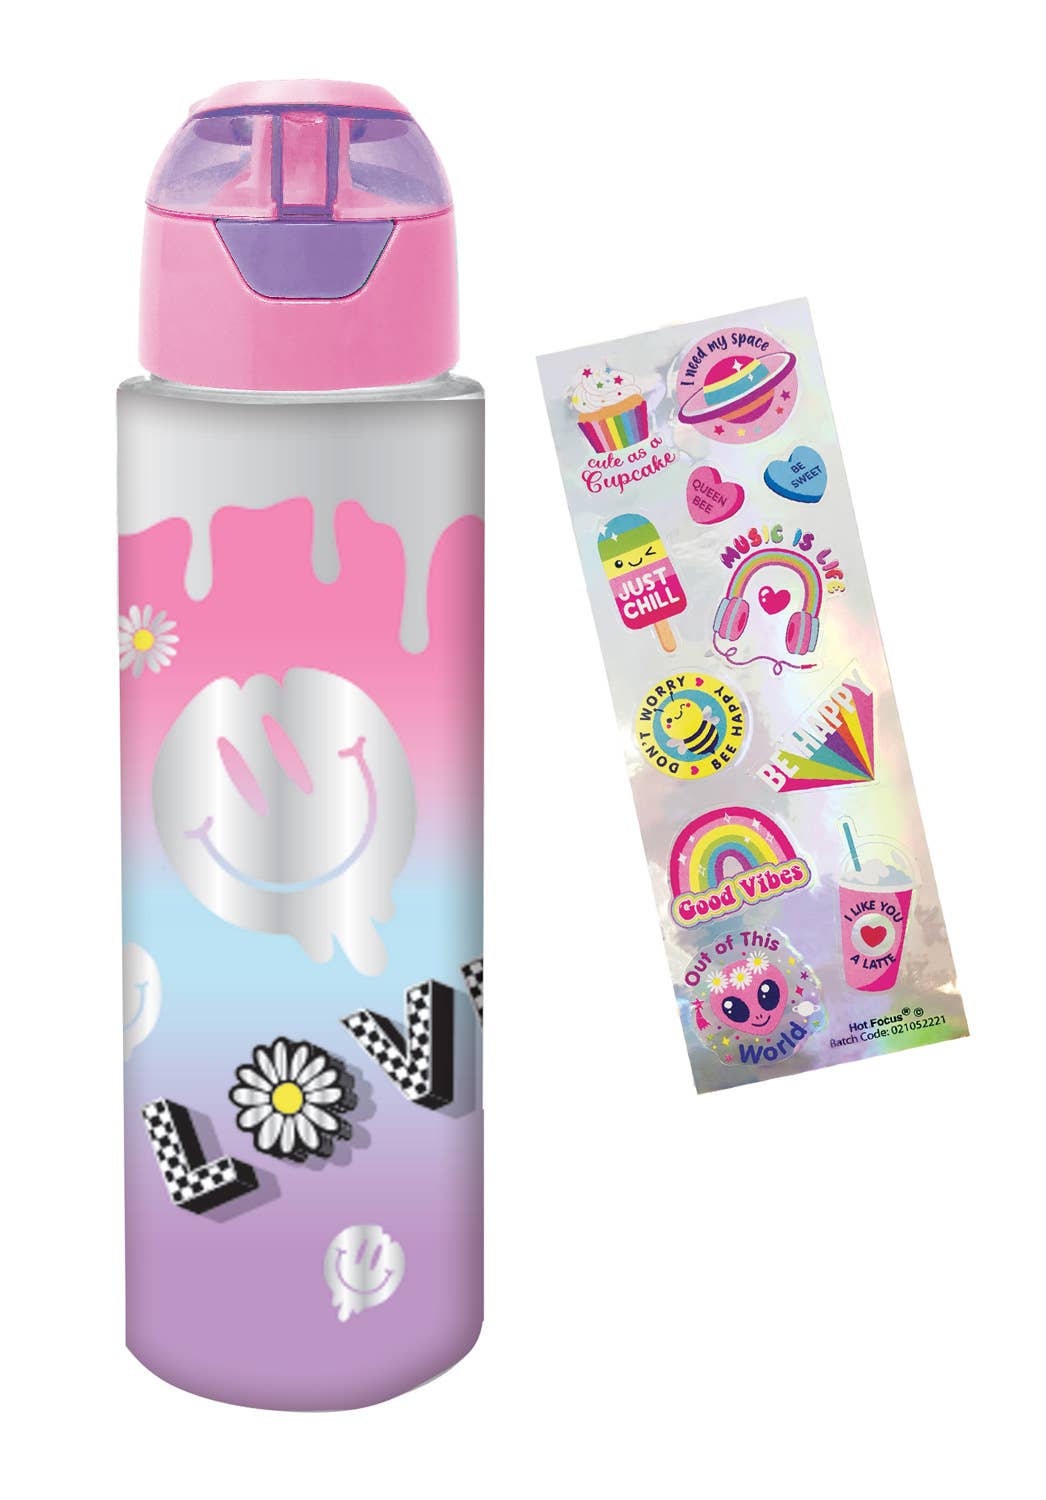 H2O Bottle with Stickers, Cool Vibes